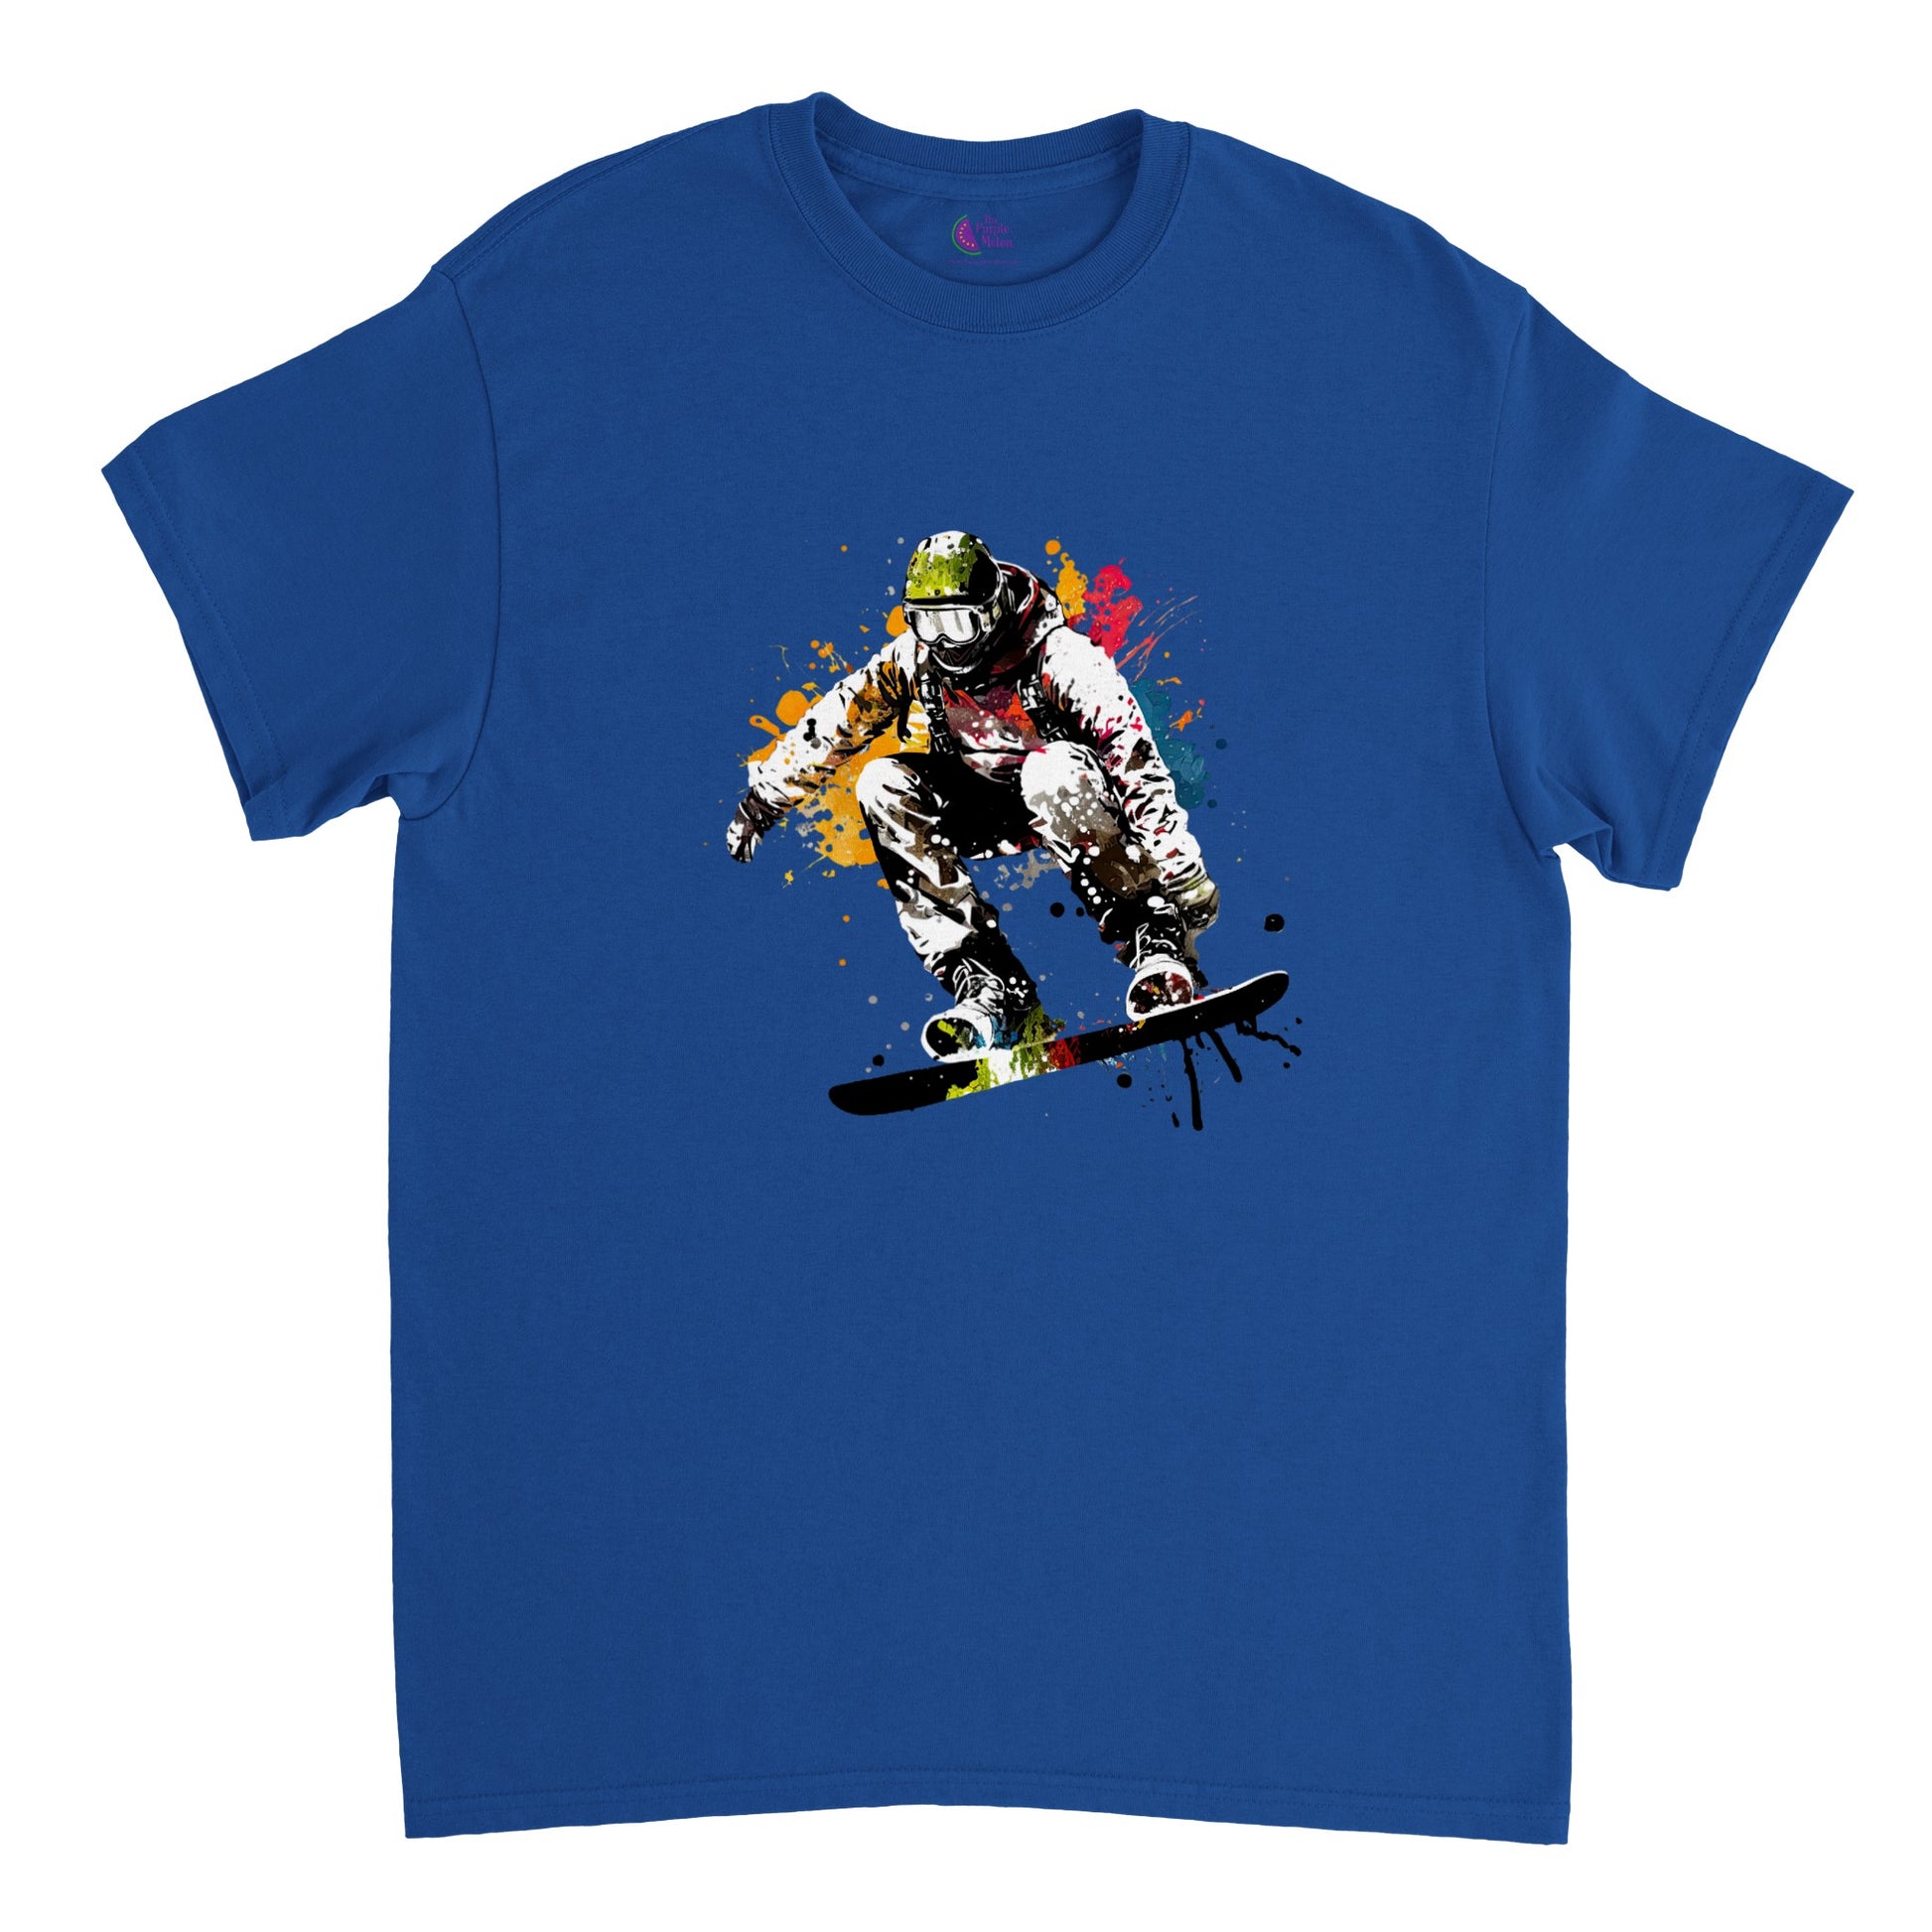 royal blue t-shirt with a snowboarder print